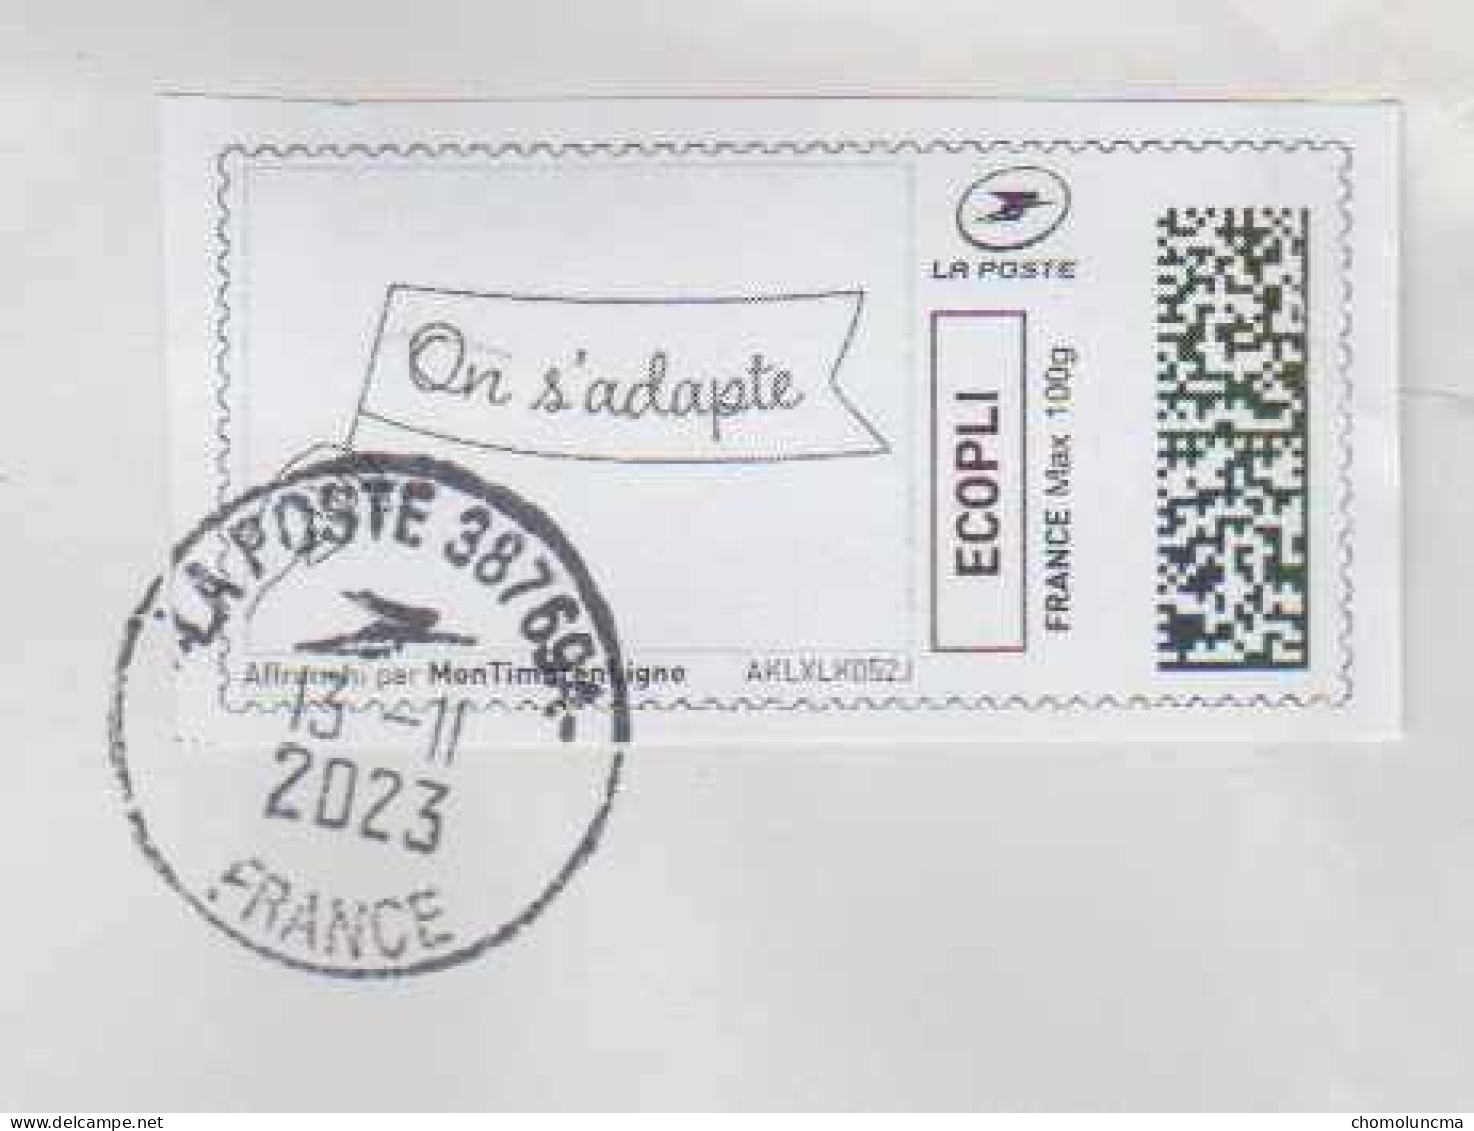 Montimbrenligne On S' Adapte Timbre Imprimé Post Office Printed Stamp Pli Courrier Cover Lettre Ecopli 100g Letter - Printable Stamps (Montimbrenligne)